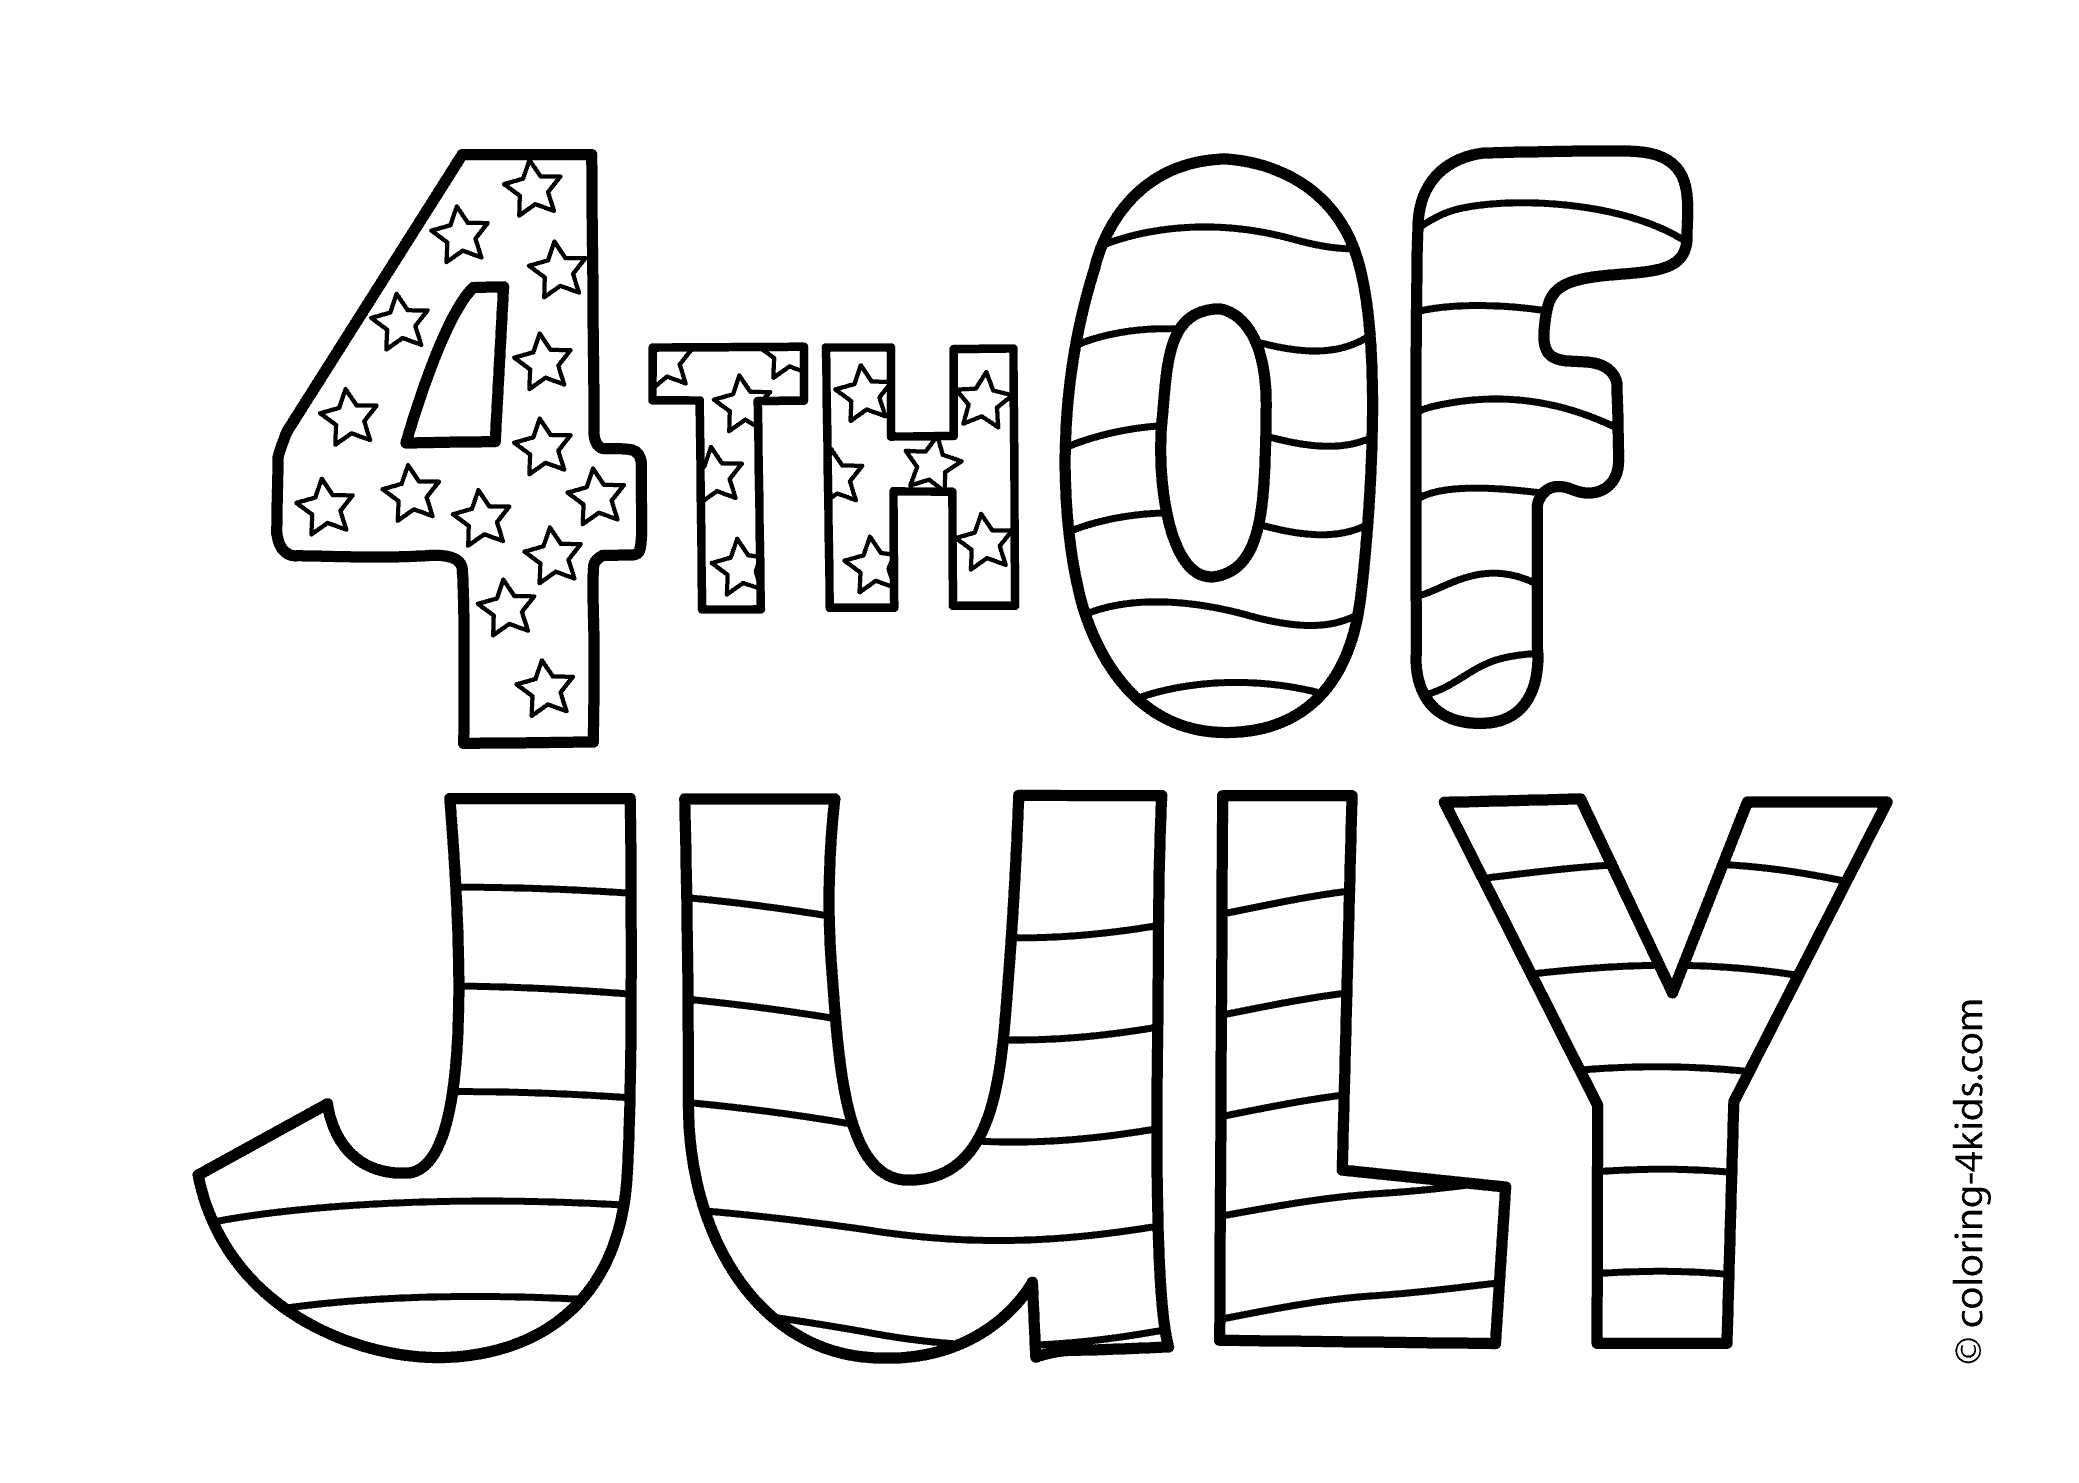 independence-day coloring page,printable,coloring pages